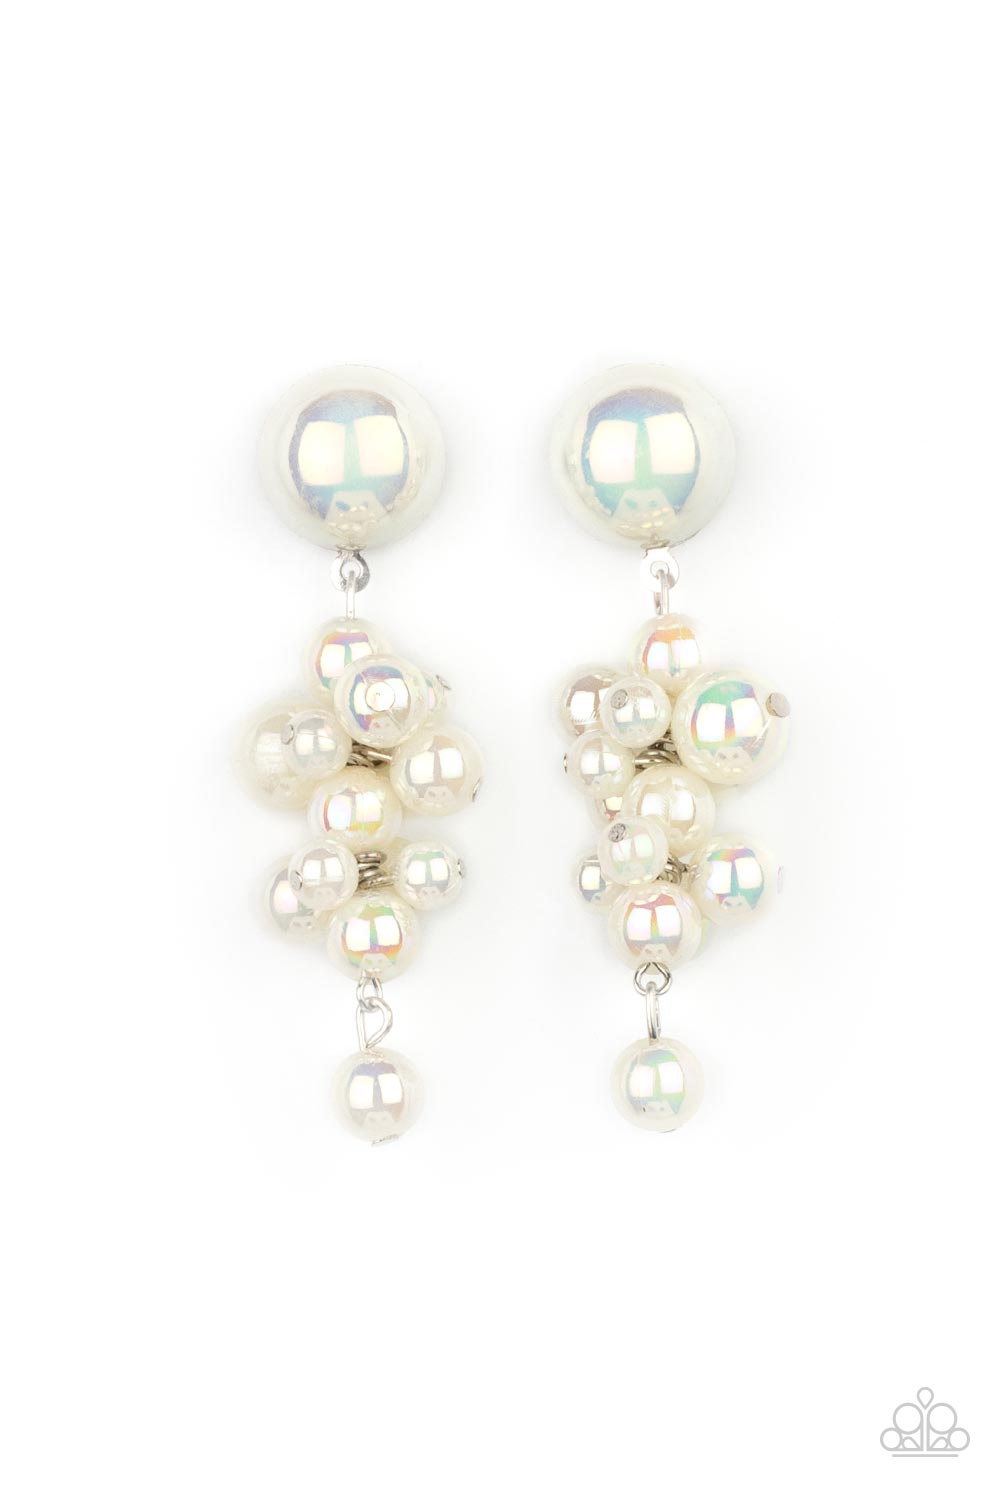 Featuring an iridescent shimmer, a bubbly collection of white pearls delicately cluster at the bottom of a matching half pearl fitting for an effervescently flirty look. Earring attaches to a standard post fitting.